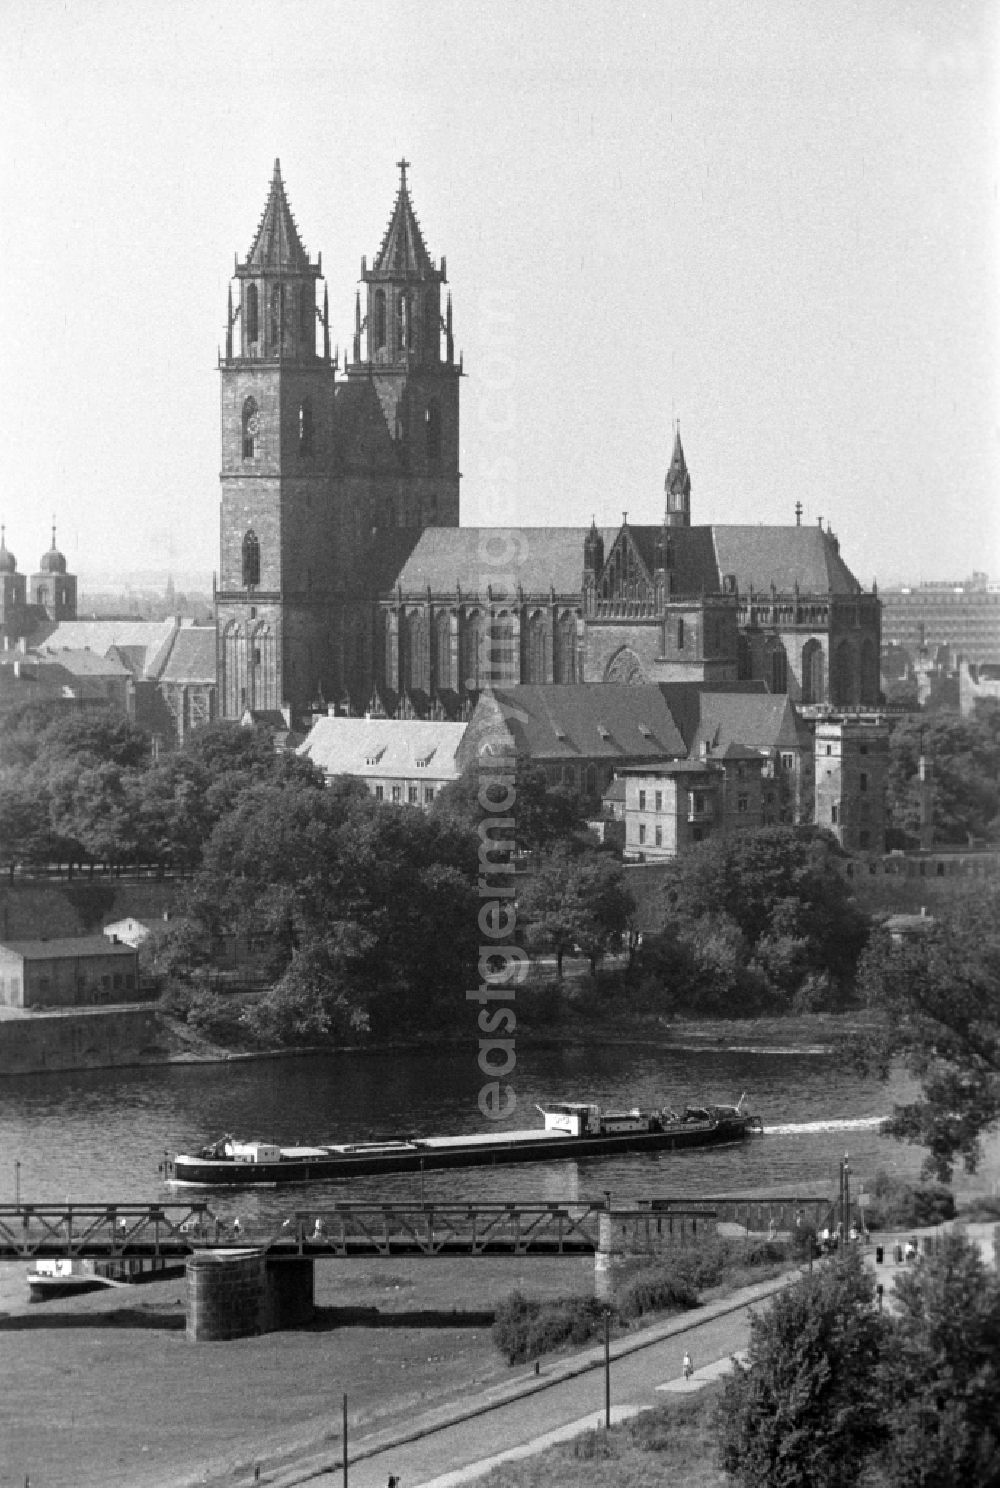 GDR image archive: Magdeburg - The Magdeburg Cathedral (official name Dom zu Magdeburg St. Mauritius und Katharina) is the episcopal church of the Evangelical Church in Central Germany and the Protestant parish church at the same time the symbol of the city